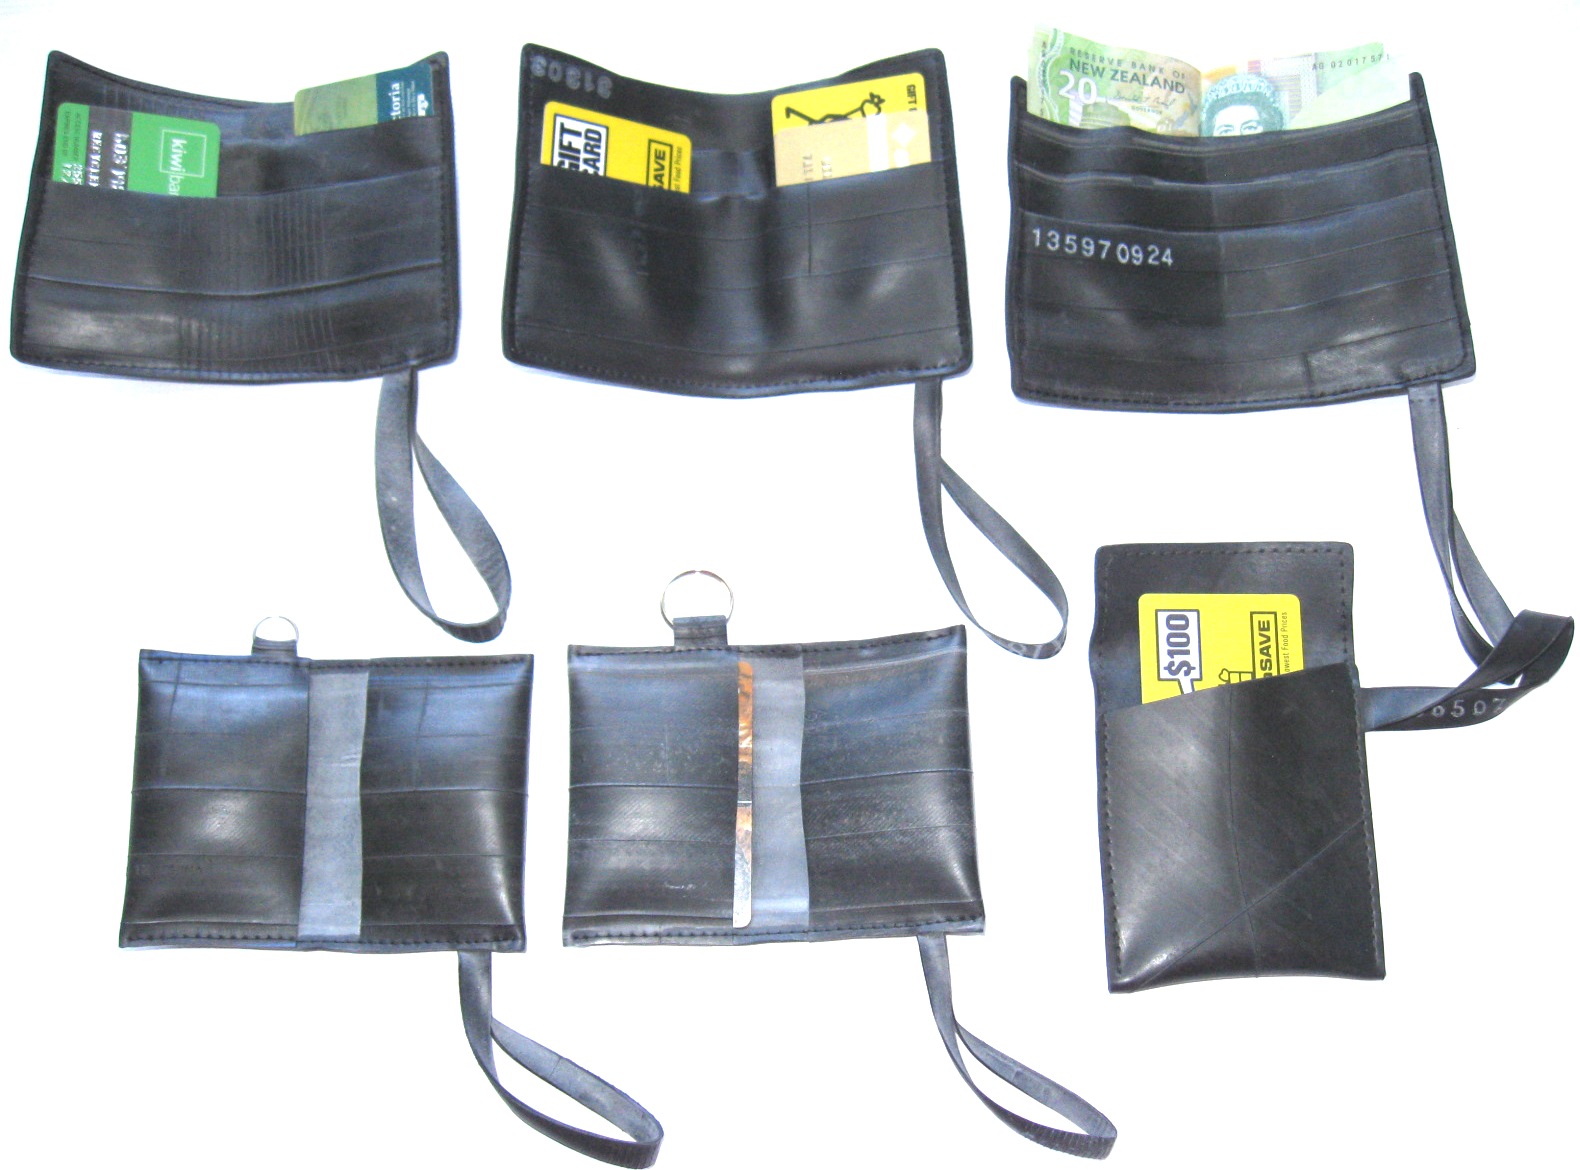 Inside view of the inner tube wallets made by recycled.co.nz in Wellington, NZ.